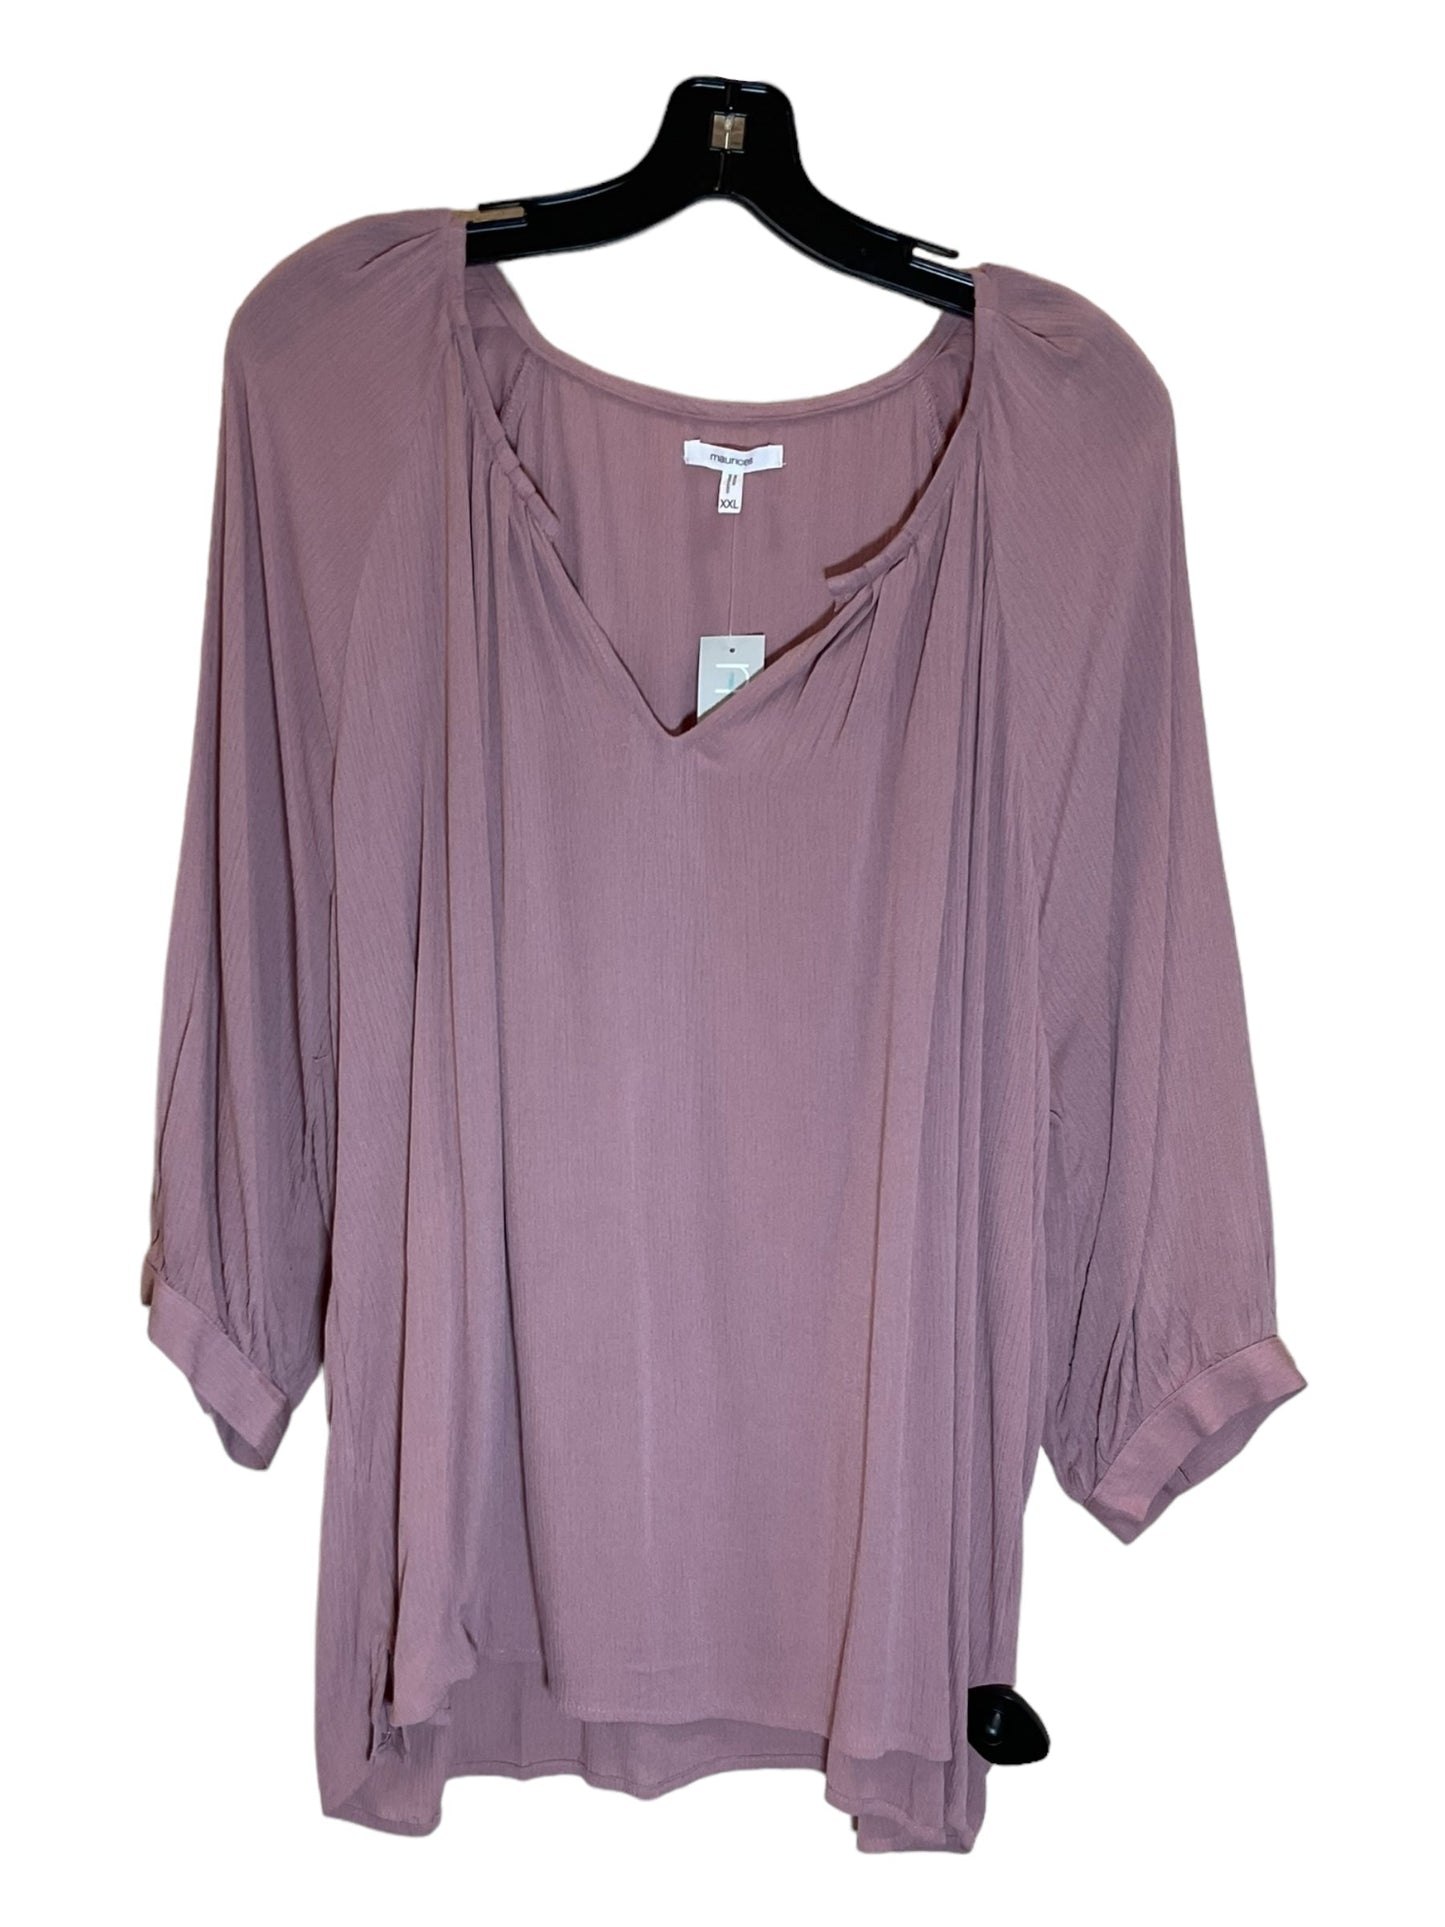 Mauve Top 3/4 Sleeve Maurices, Size 1x